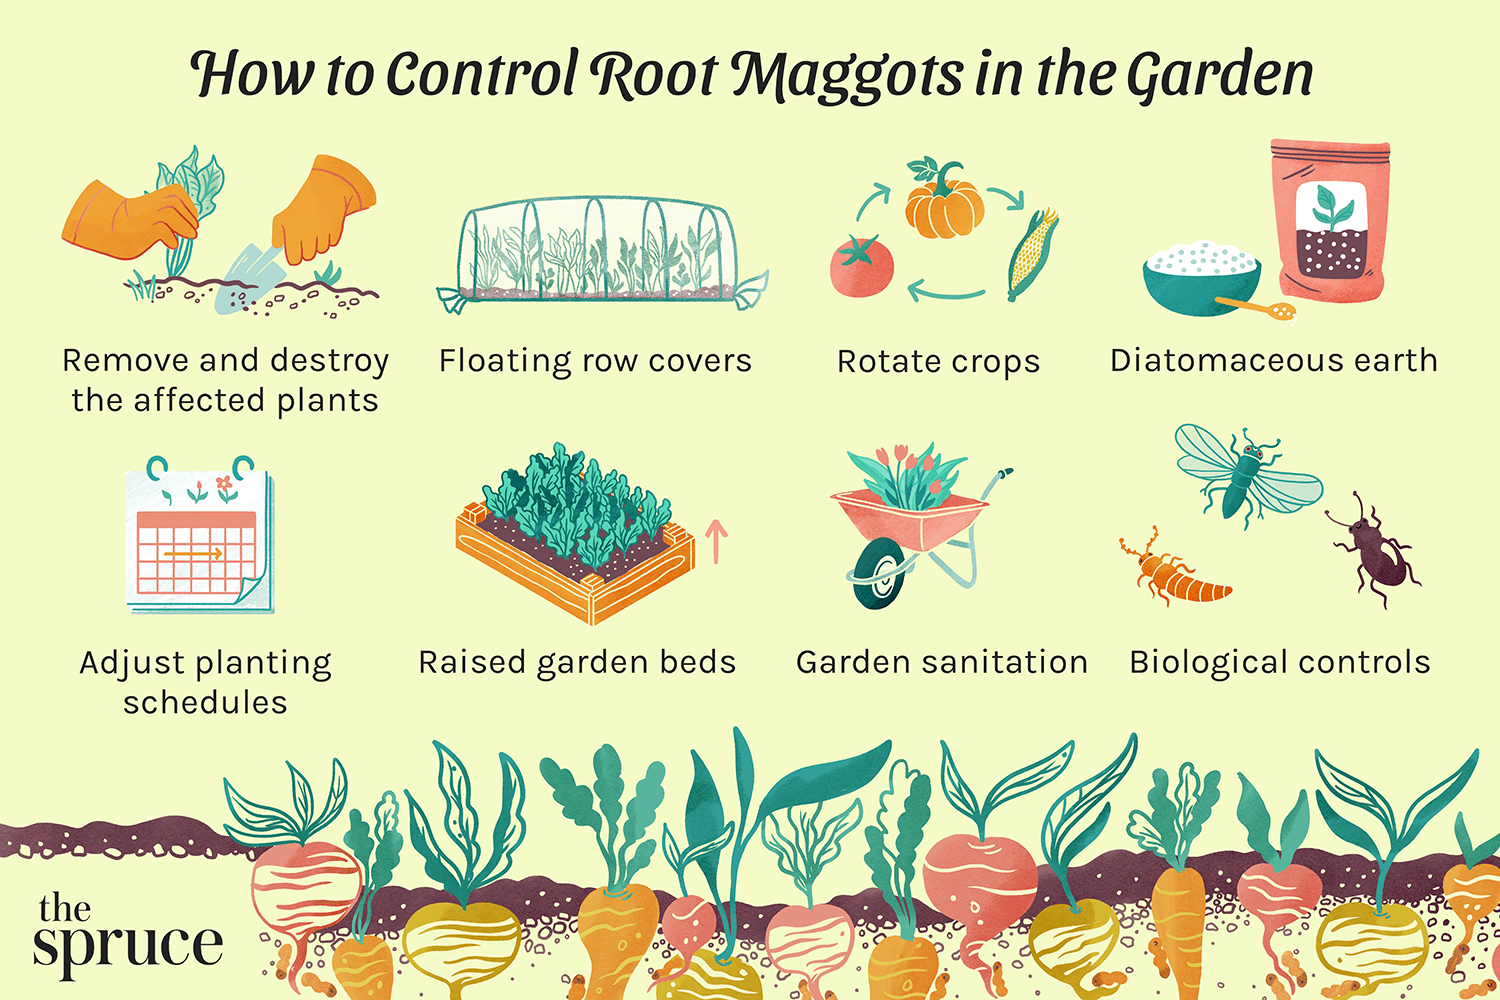 How to Control Root Maggots in the Garden